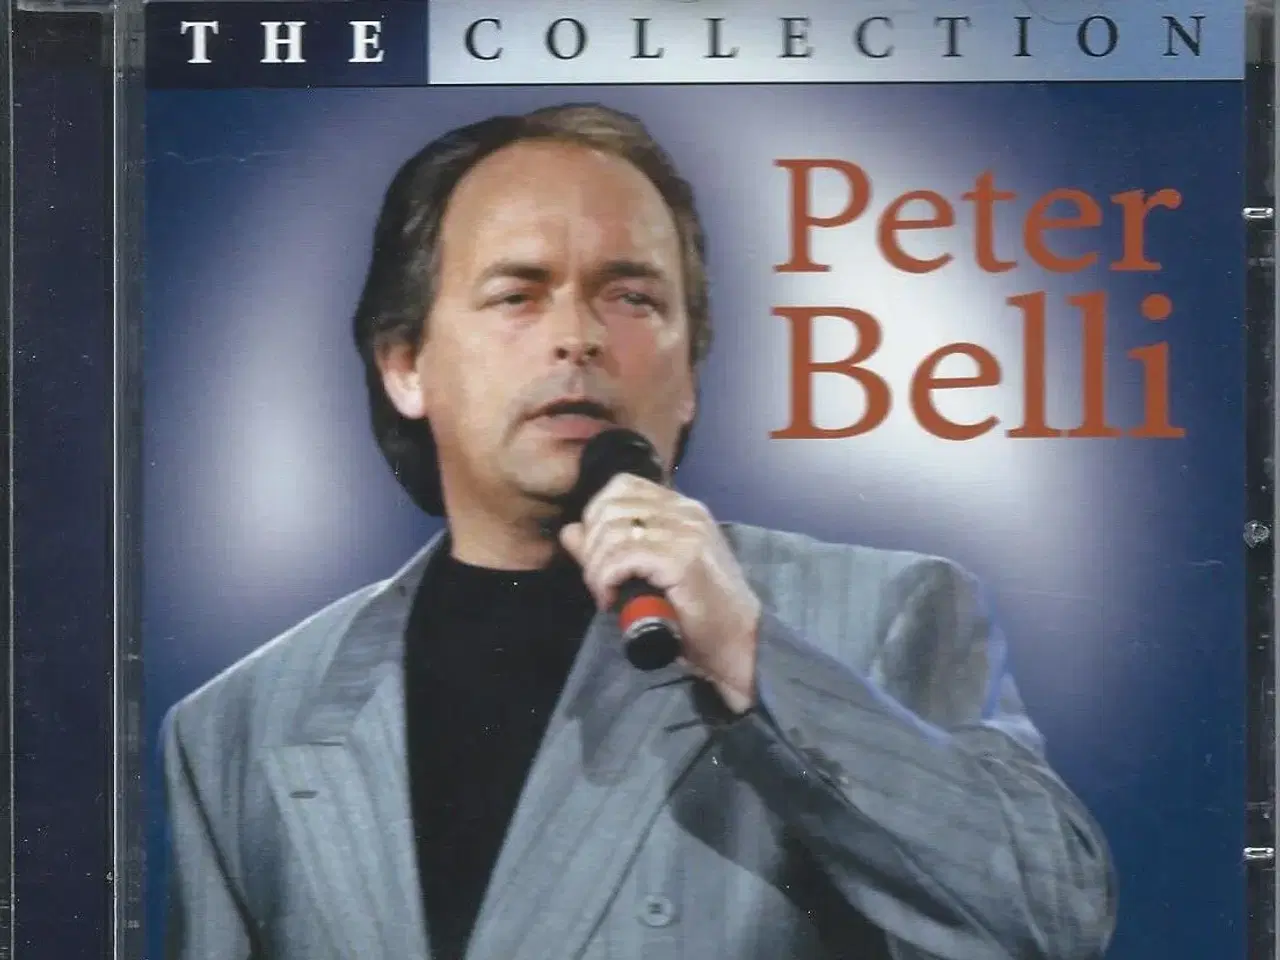 Billede 1 - Peter Belli - The collection